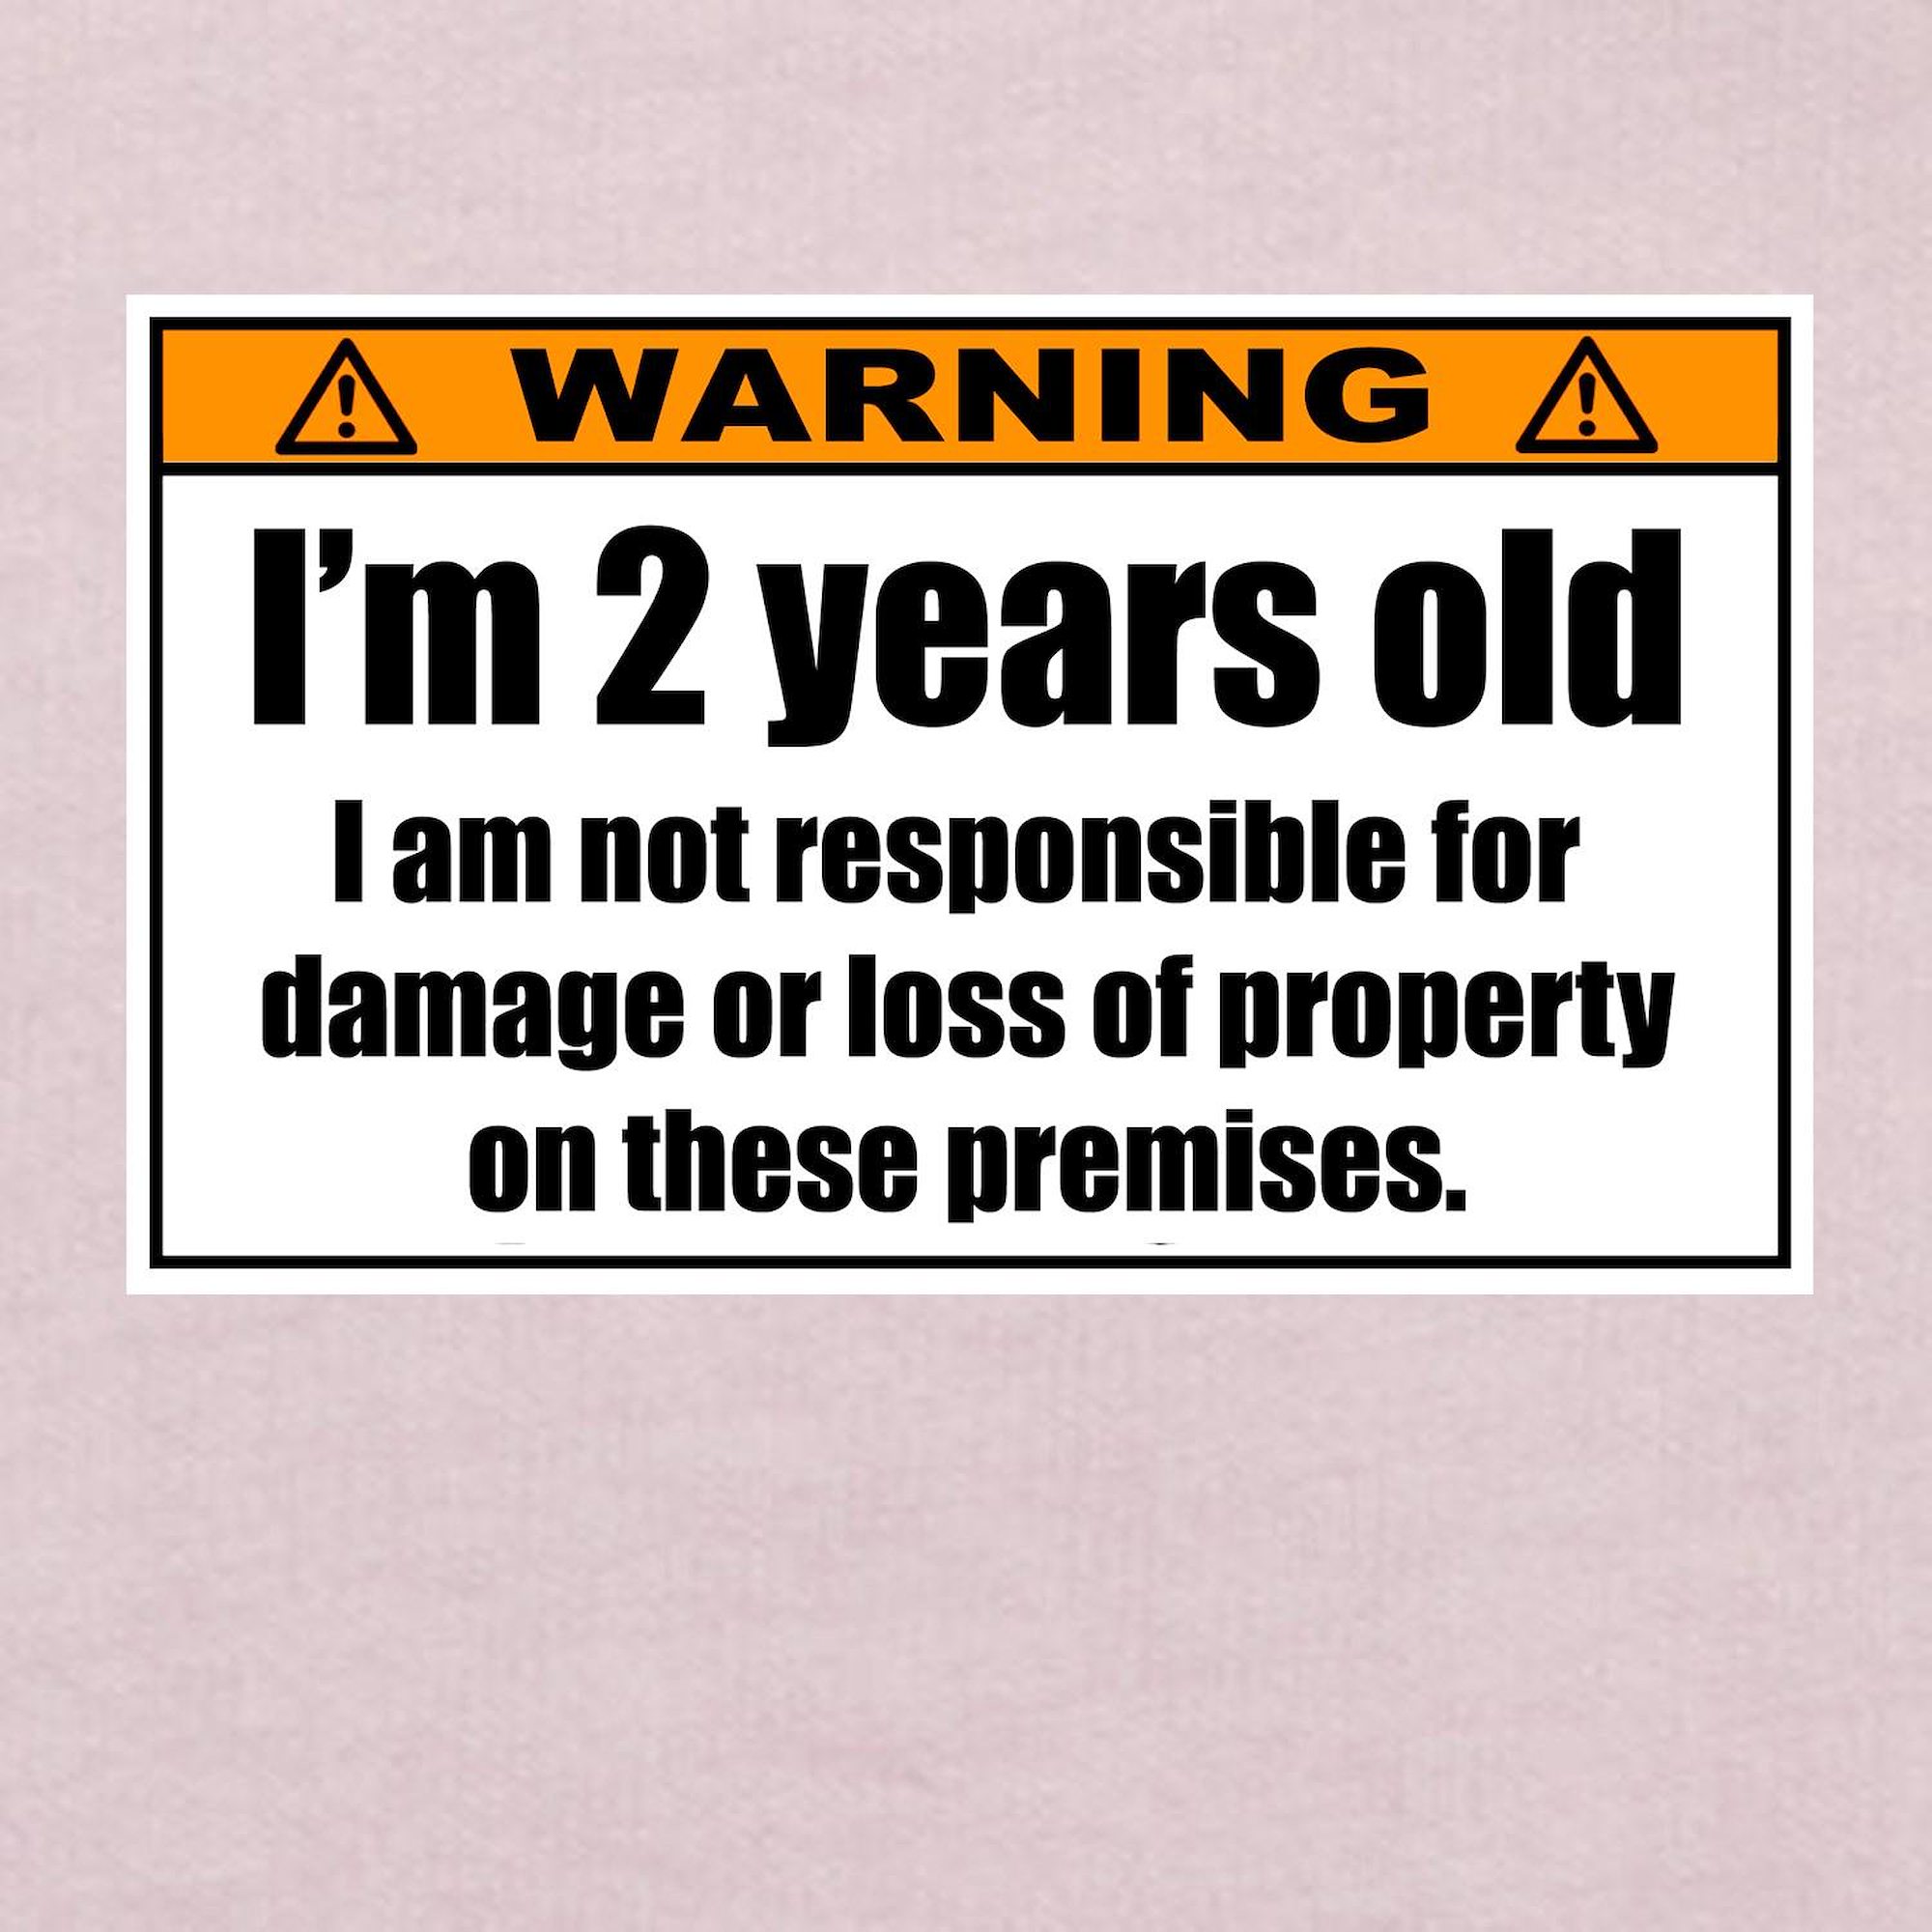 CafePress - Funny Warning: I'm 2 Years Old T Shirt - Cute Toddler T-Shirt, 100% Cotton - image 3 of 4